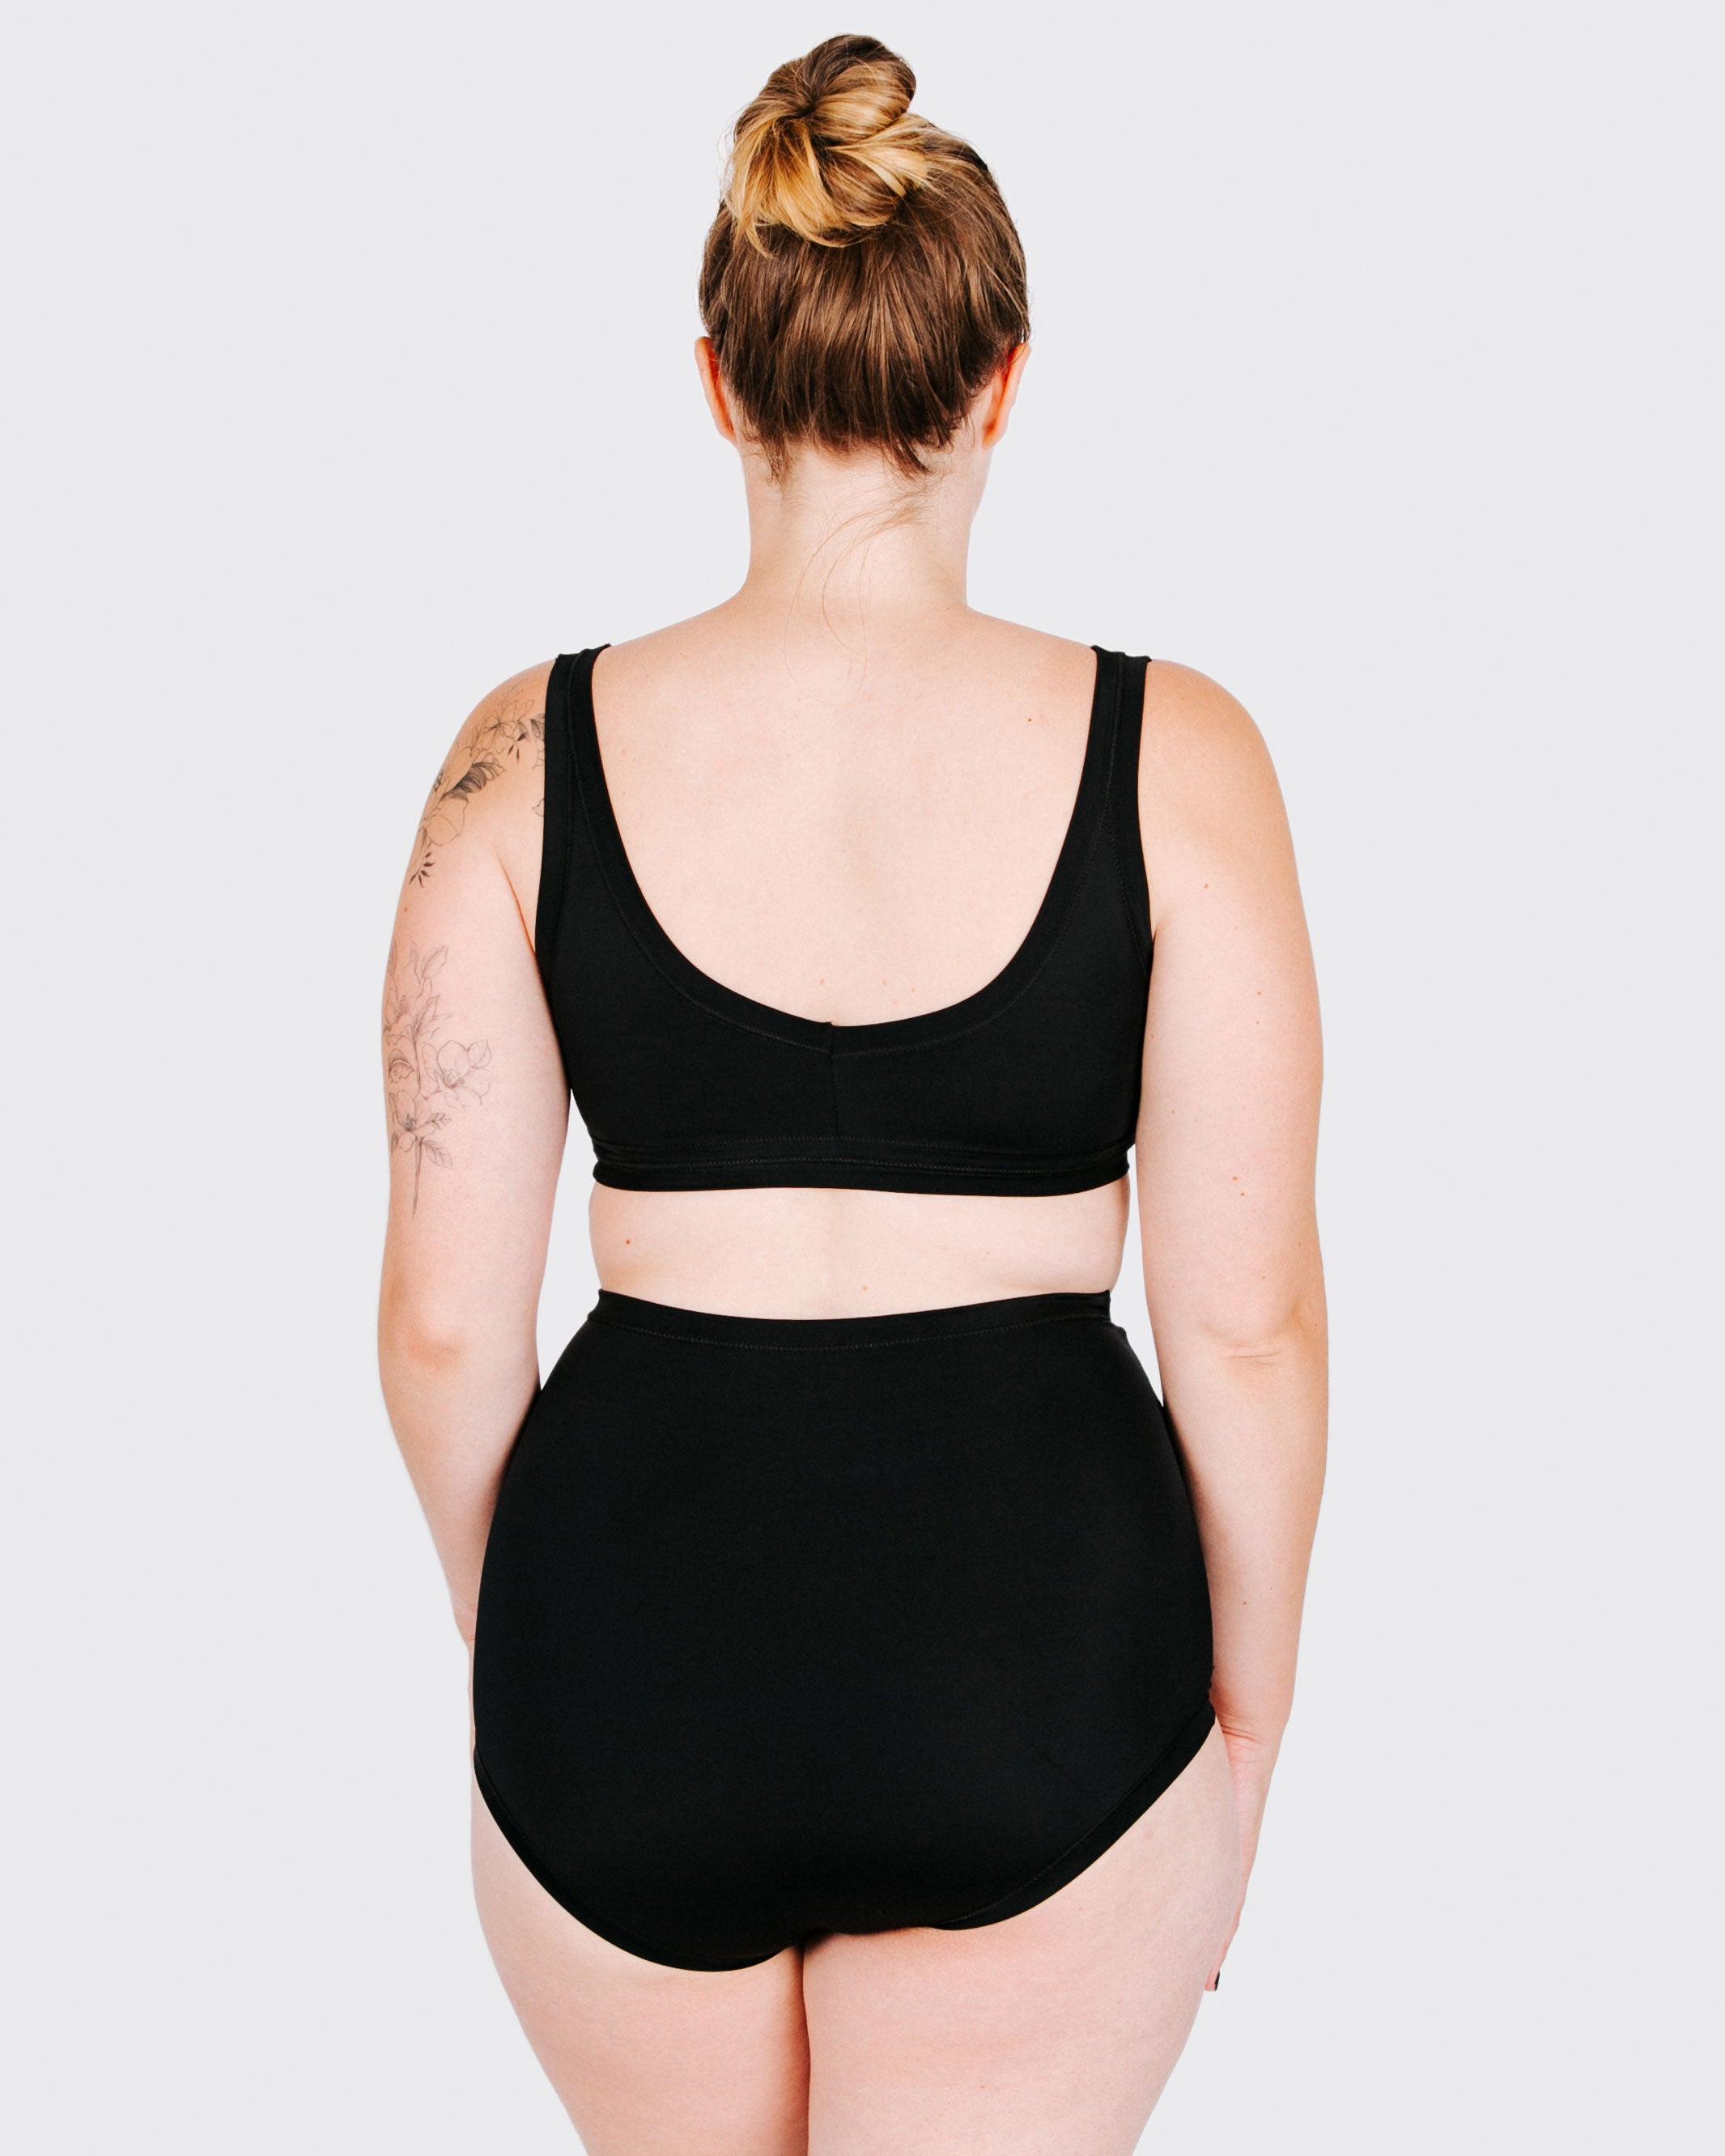 Fit photo from the back of Thunderpants recycled nylon Swimwear Sky Rise style bottoms in Plain Black, showing a wedgie-free bum, on a model.